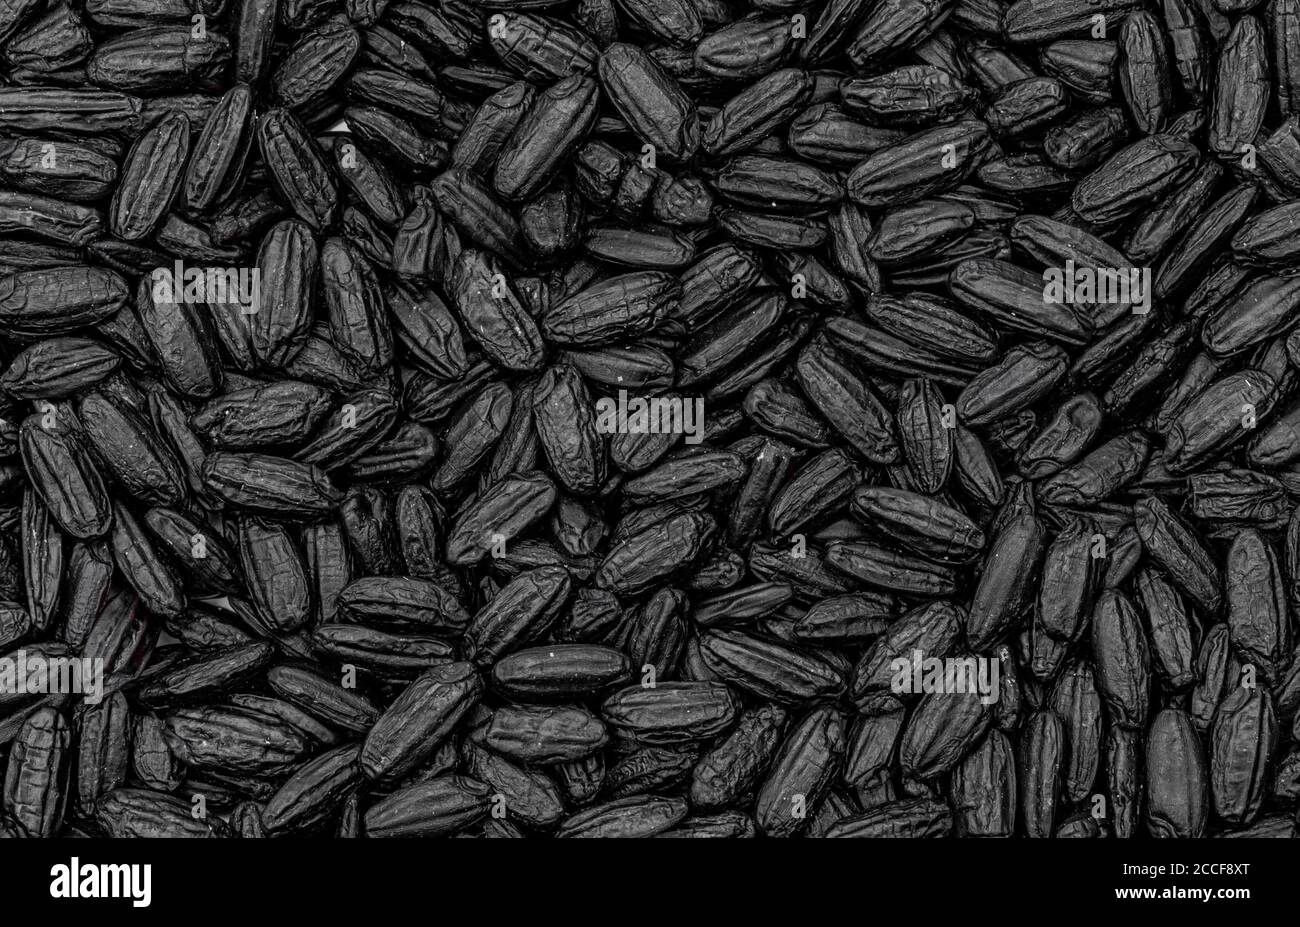 Black rice grains as a background image Stock Photo